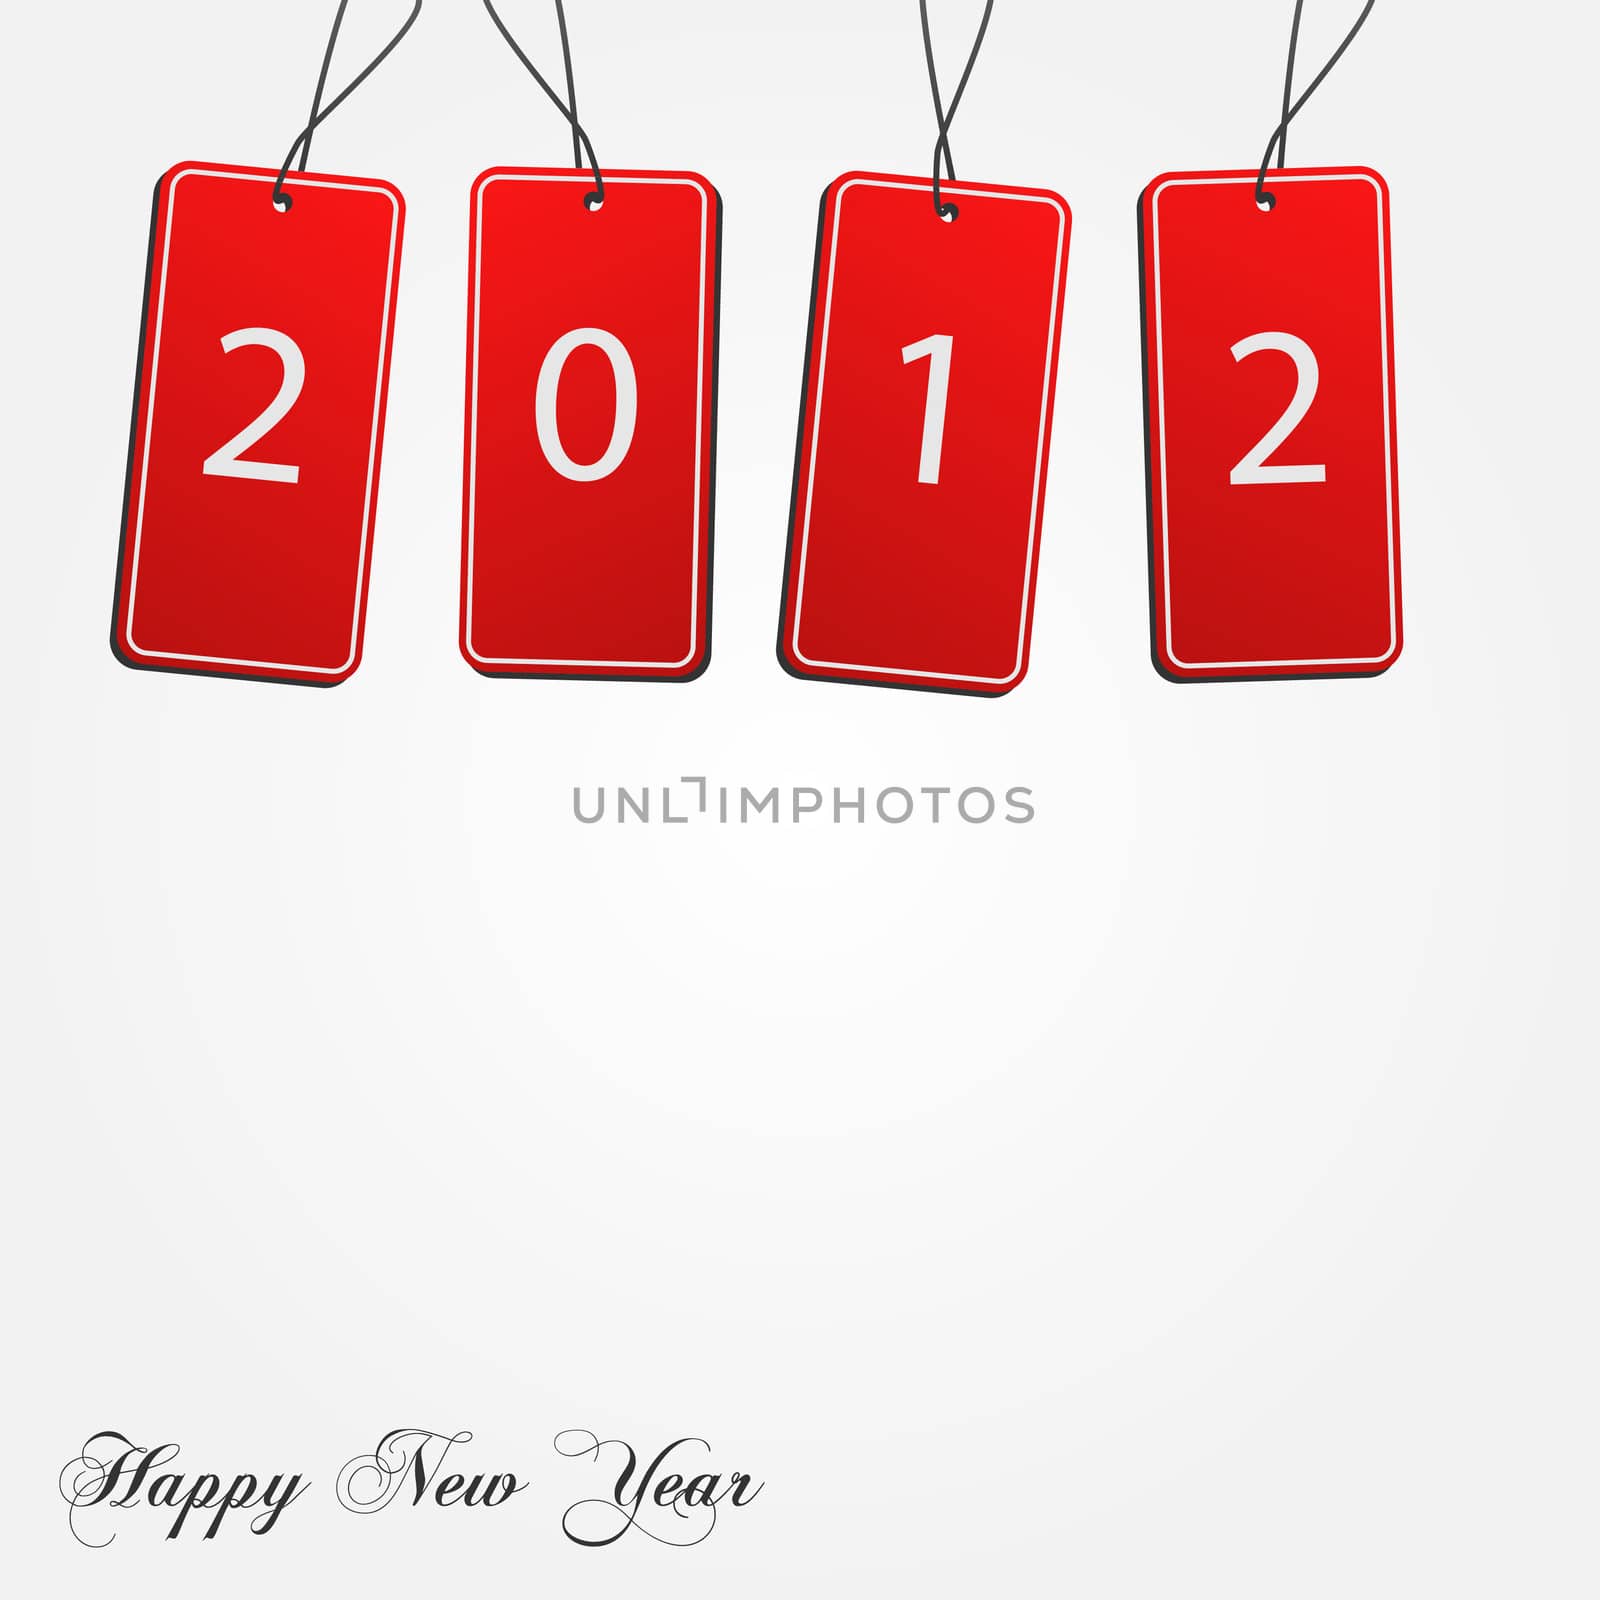 Image of 2012 tags isolated on a white background.